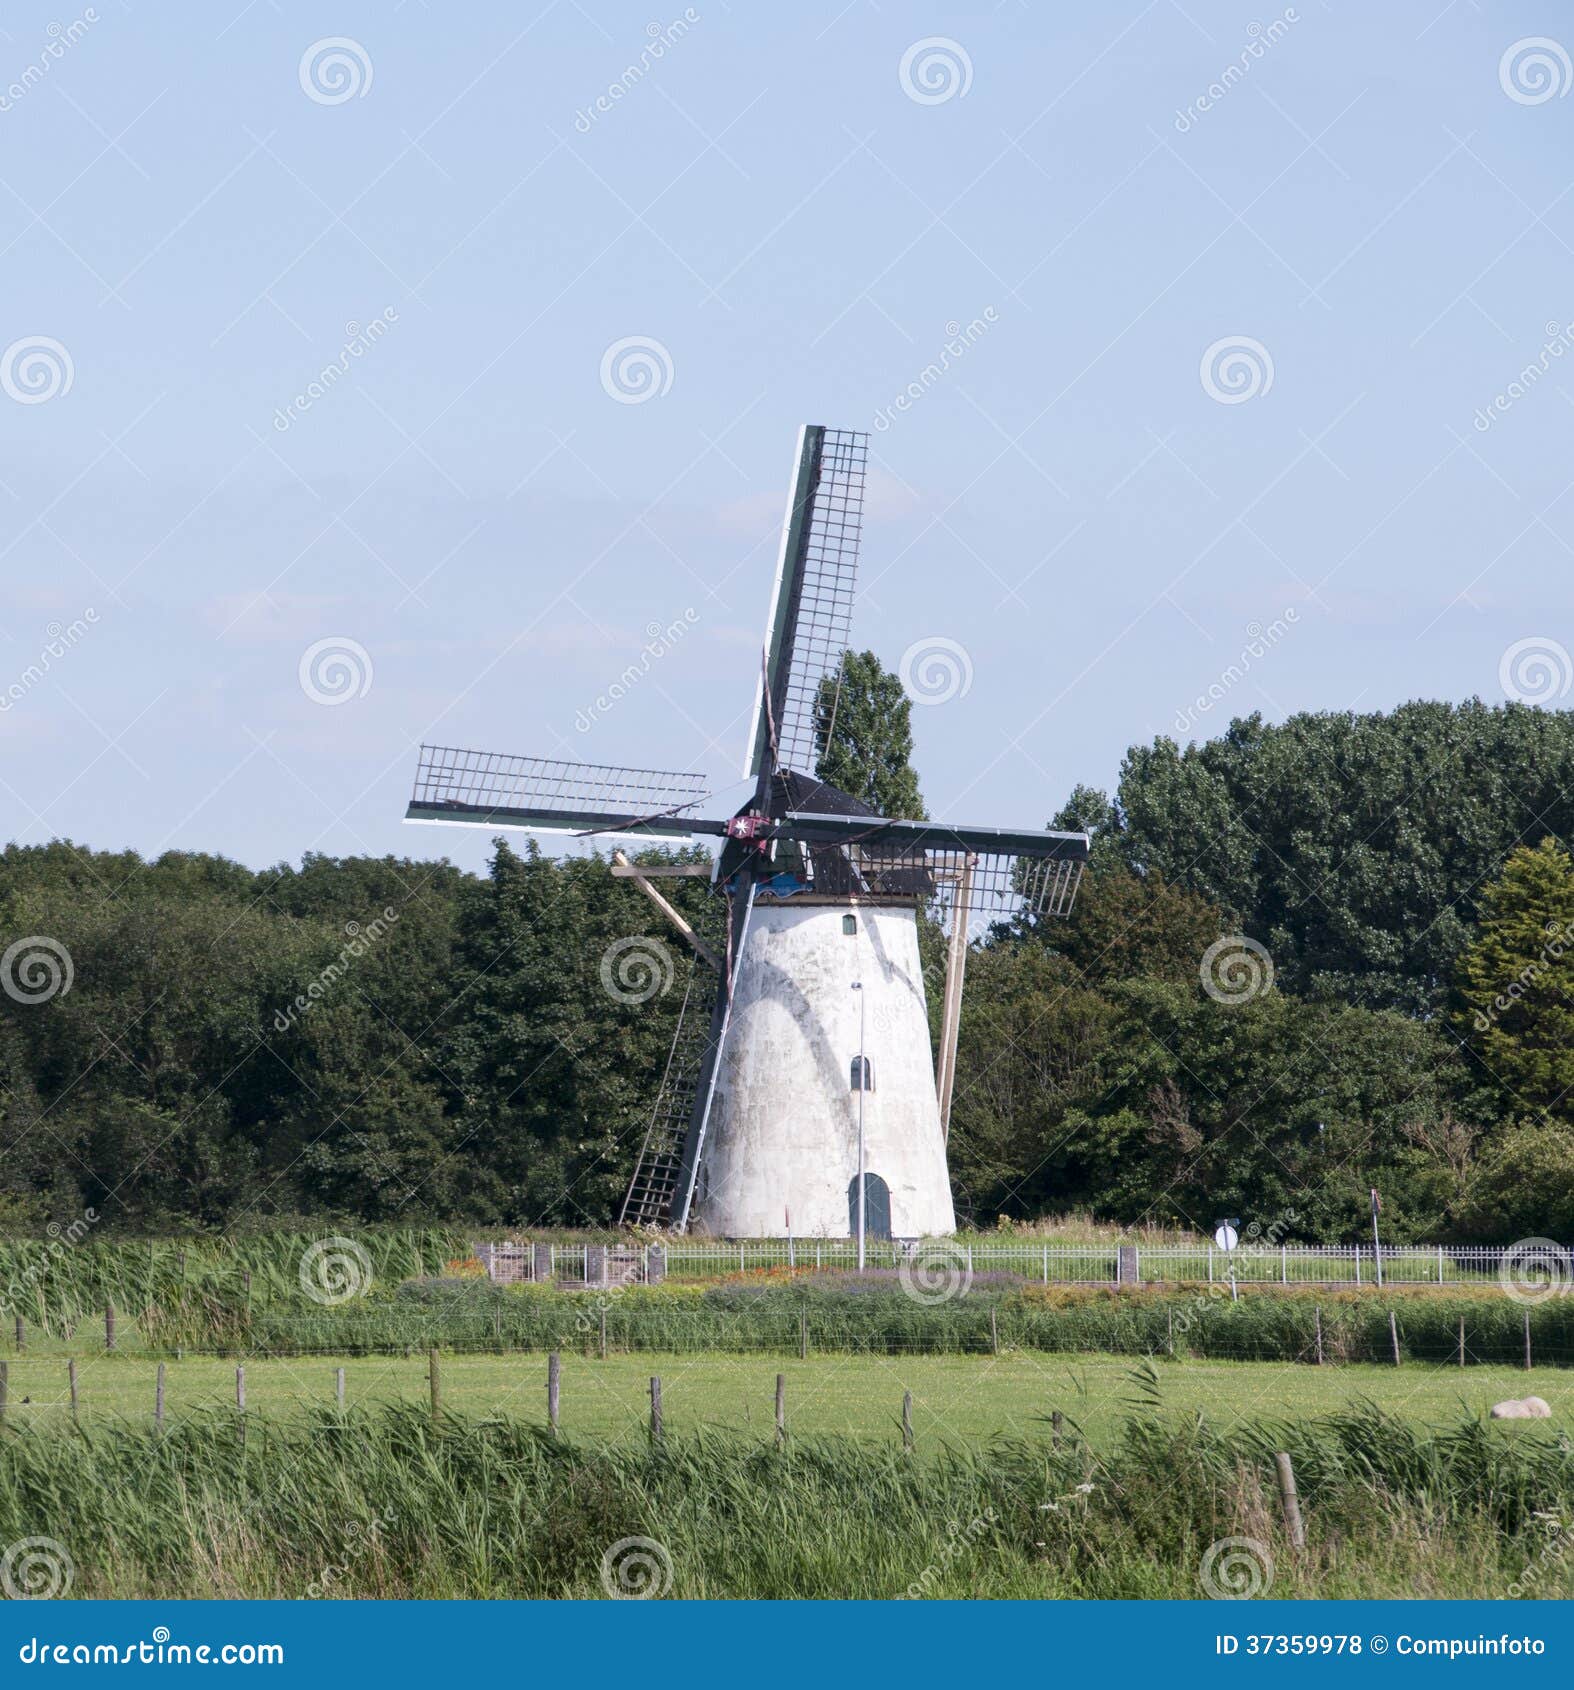 Old Windmill Royalty Free Stock Photos - Image: 37359978